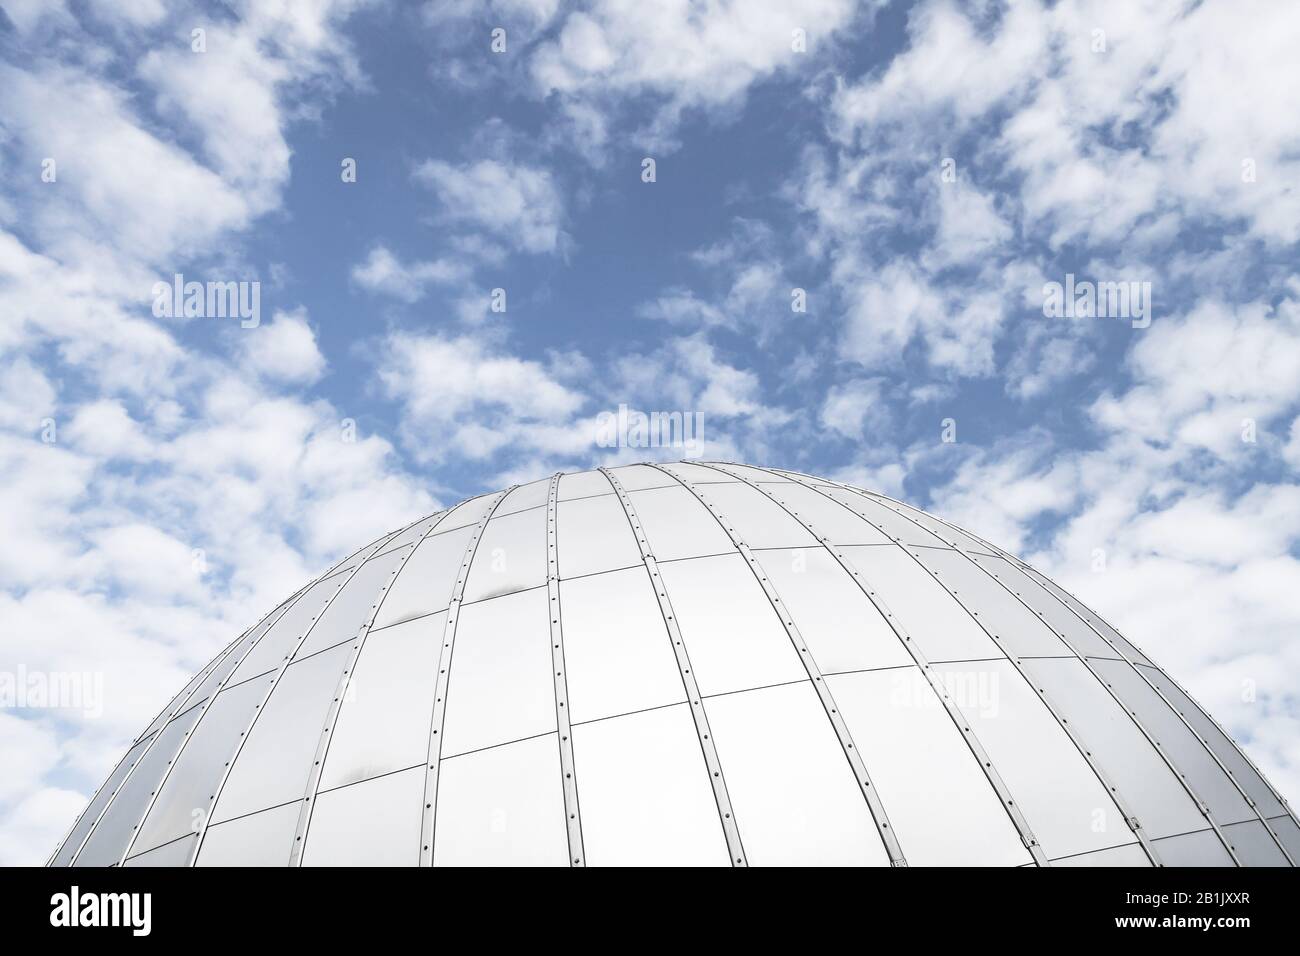 Shiny metallic observatory dome under cloudy blue sky, abstract background photo Stock Photo